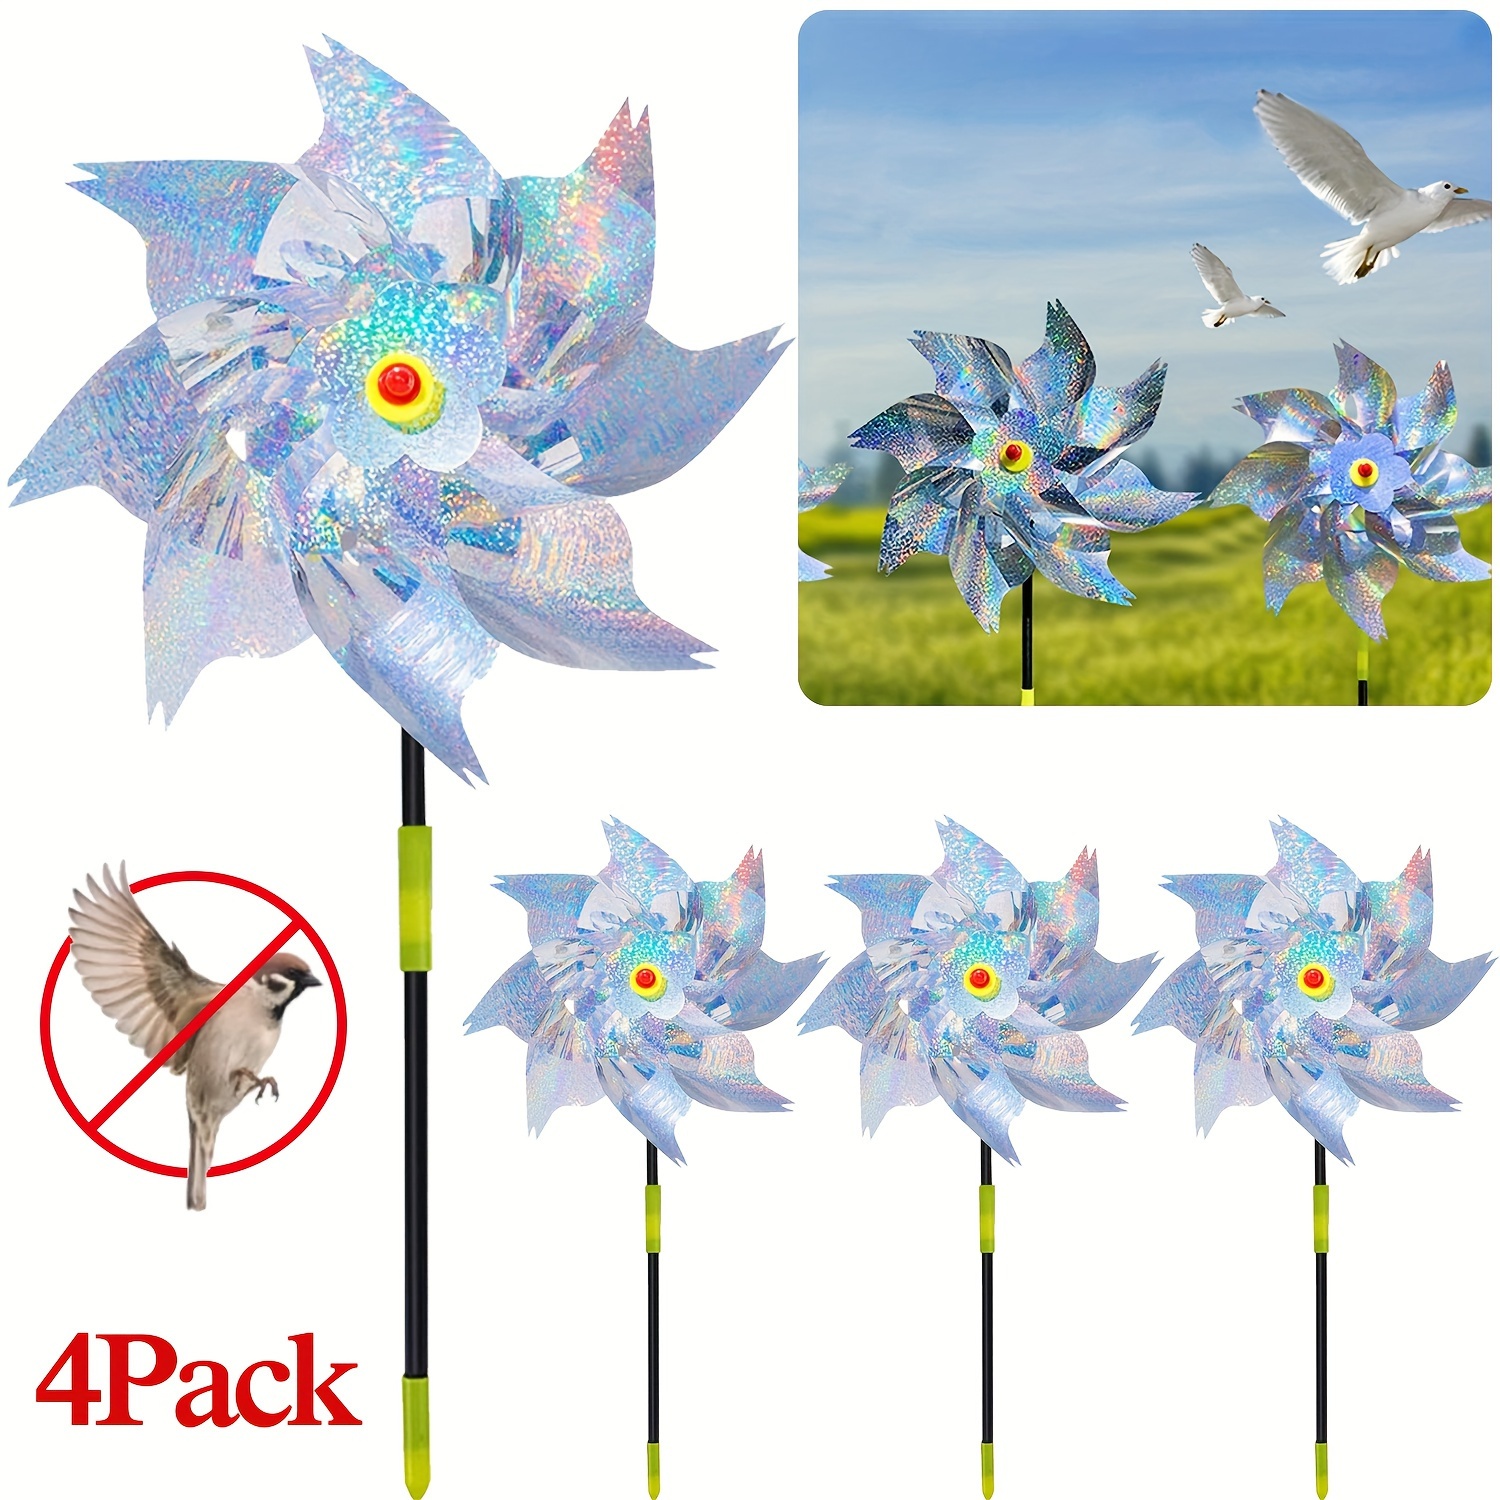 

Set of 4 reflective pinwheels with stakes, bird deterrent sparkly pinwheels, wind spinner upgrade with 8 sparkling panels for garden decoration, silver wind spinner for lawn and patio.